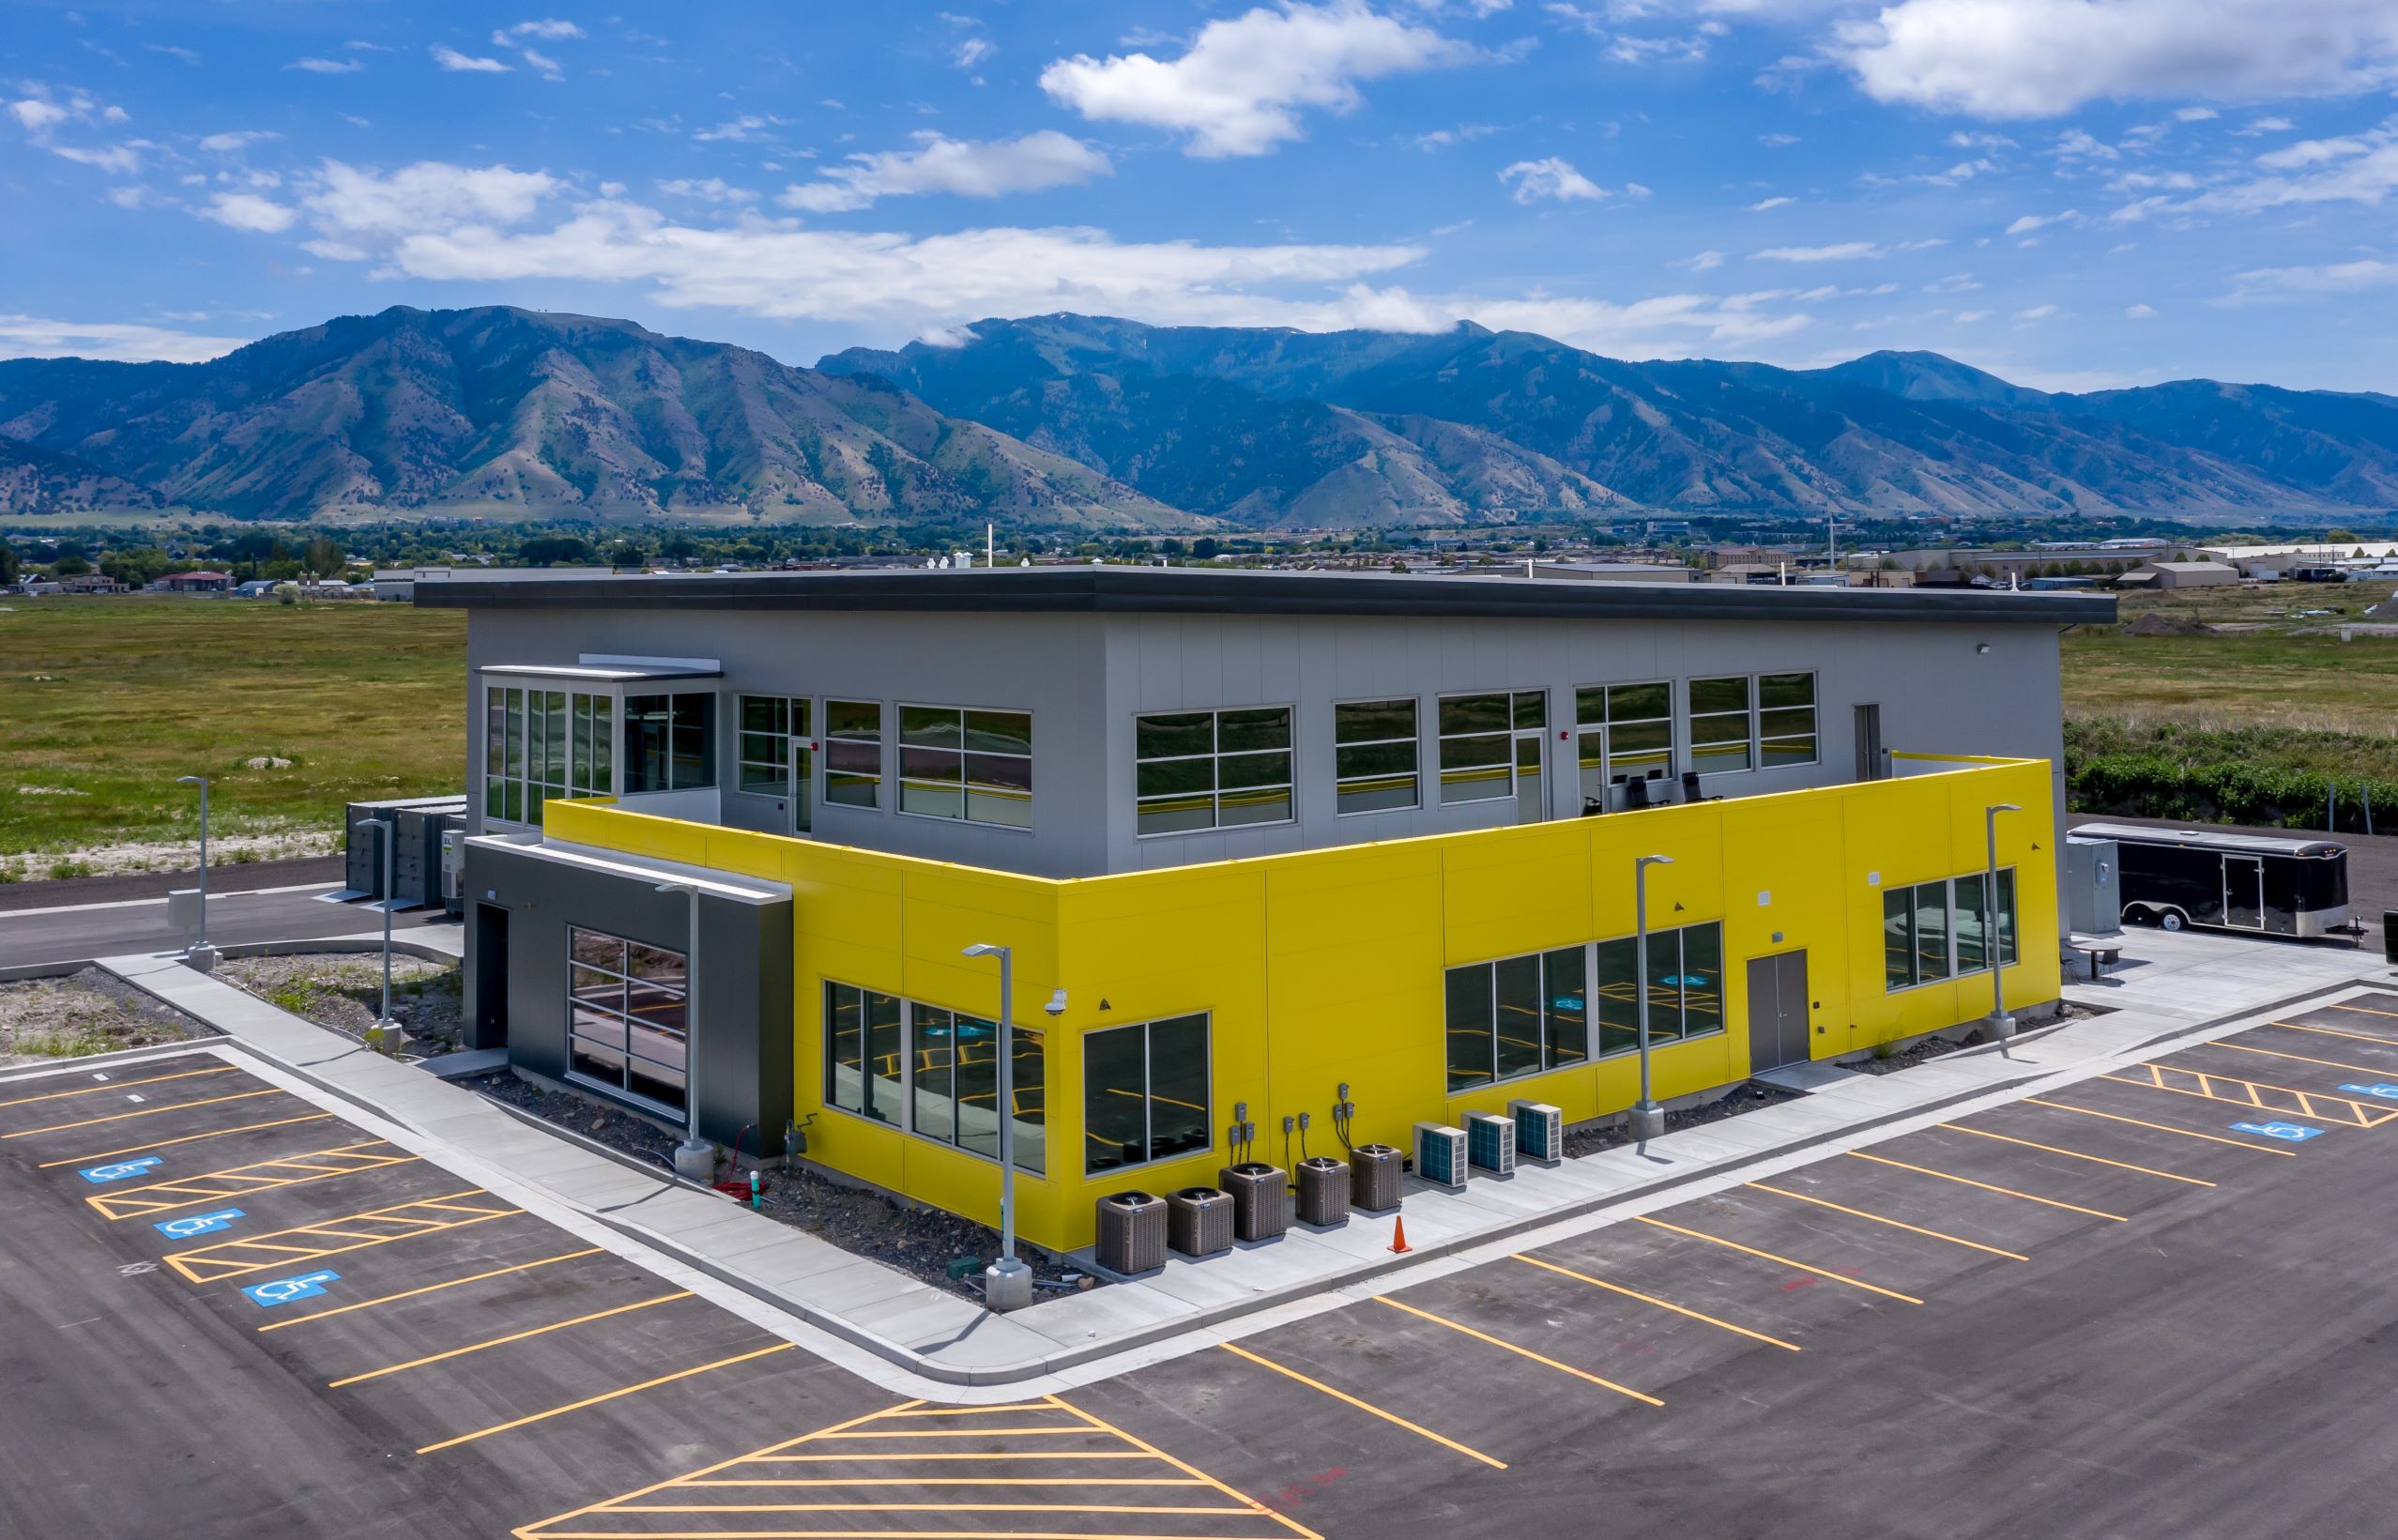 Featured image for “Electric Power Systems To Expand Its Logan Headquarters”